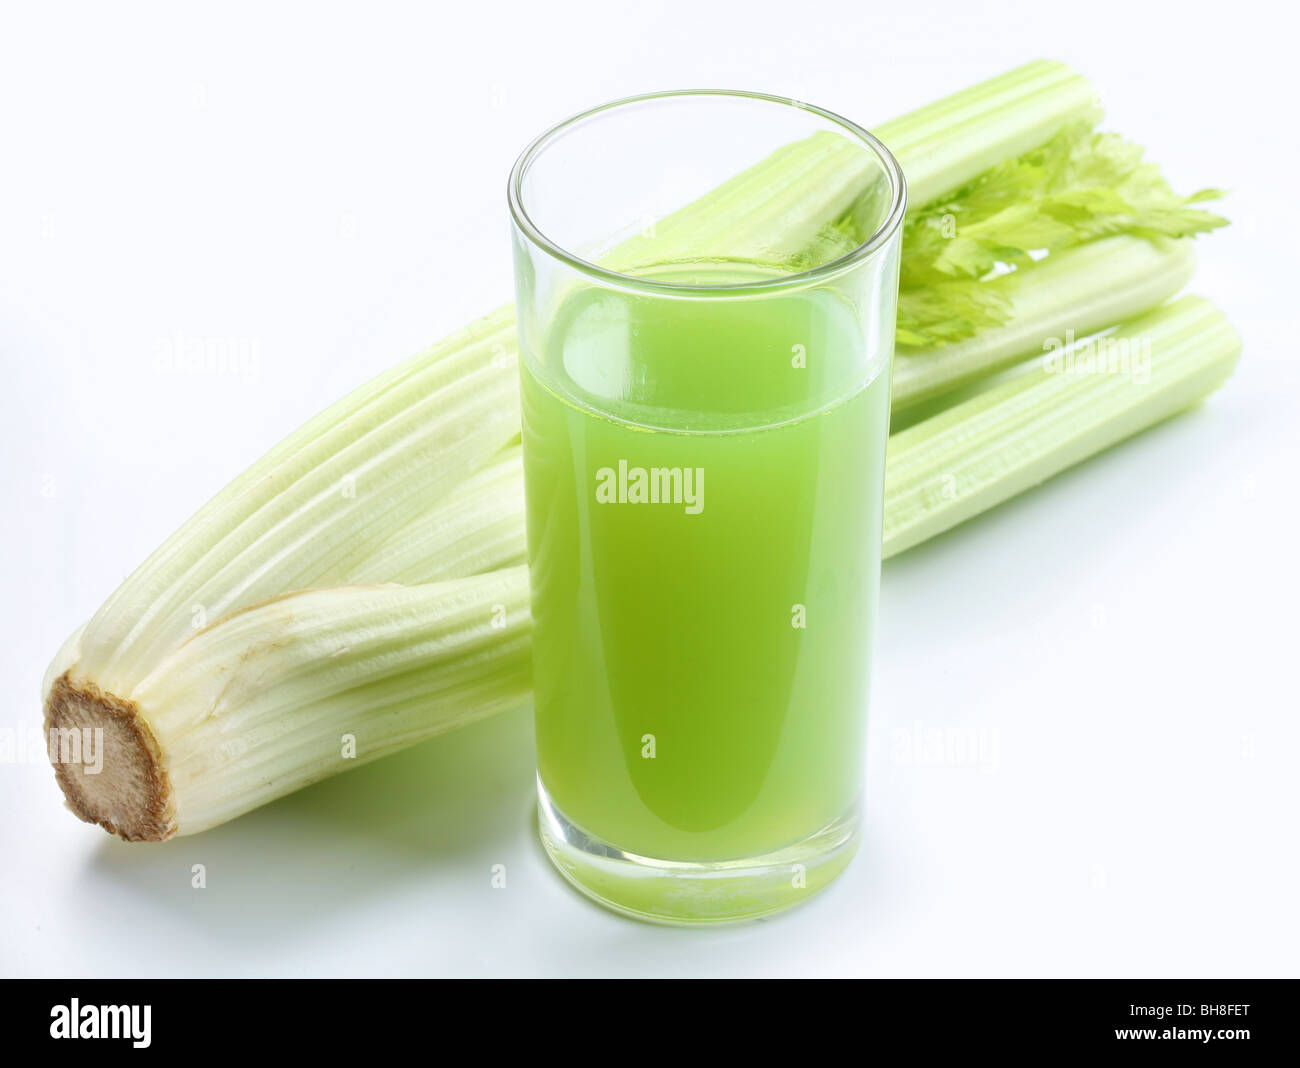 juice from the stalks of celery plants Stock Photo